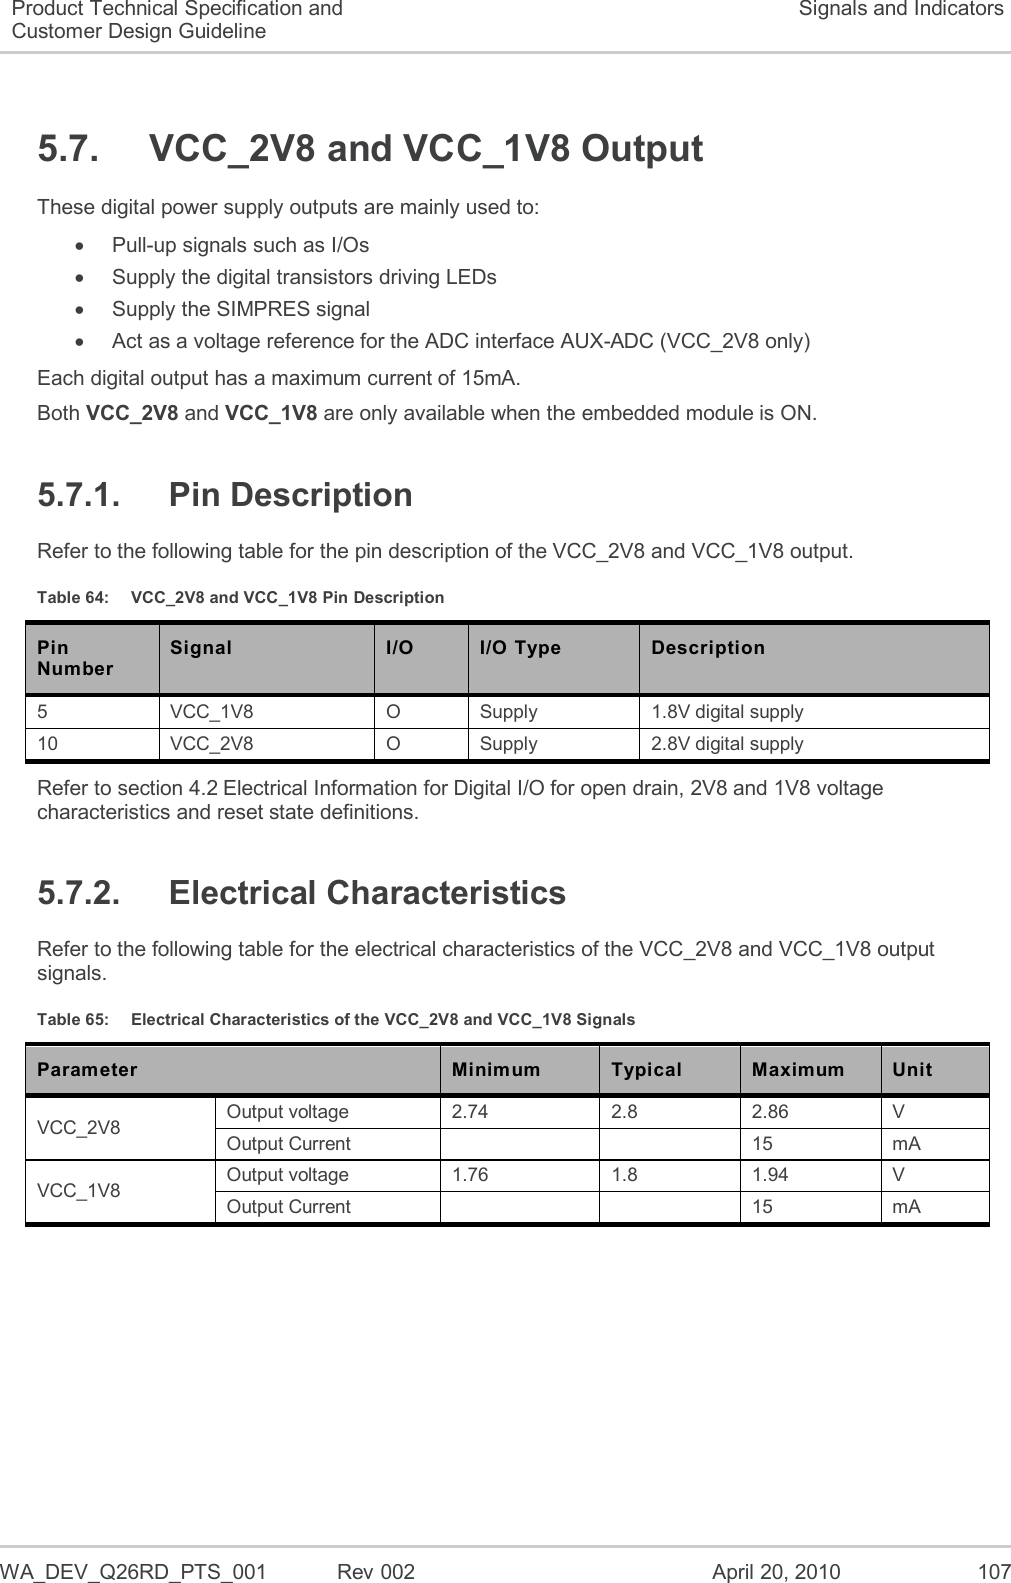   WA_DEV_Q26RD_PTS_001  Rev 002  April 20, 2010 107 Product Technical Specification and Customer Design Guideline Signals and Indicators 5.7.  VCC_2V8 and VCC_1V8 Output These digital power supply outputs are mainly used to:   Pull-up signals such as I/Os   Supply the digital transistors driving LEDs   Supply the SIMPRES signal   Act as a voltage reference for the ADC interface AUX-ADC (VCC_2V8 only) Each digital output has a maximum current of 15mA. Both VCC_2V8 and VCC_1V8 are only available when the embedded module is ON. 5.7.1.  Pin Description Refer to the following table for the pin description of the VCC_2V8 and VCC_1V8 output. Table 64:  VCC_2V8 and VCC_1V8 Pin Description Pin Number Signal I/O I/O Type Description 5 VCC_1V8 O Supply 1.8V digital supply  10 VCC_2V8 O Supply 2.8V digital supply  Refer to section 4.2 Electrical Information for Digital I/O for open drain, 2V8 and 1V8 voltage characteristics and reset state definitions. 5.7.2.  Electrical Characteristics Refer to the following table for the electrical characteristics of the VCC_2V8 and VCC_1V8 output signals. Table 65:  Electrical Characteristics of the VCC_2V8 and VCC_1V8 Signals Parameter Minimum Typical Maximum Unit VCC_2V8 Output voltage 2.74 2.8 2.86 V Output Current    15 mA VCC_1V8 Output voltage 1.76 1.8 1.94 V Output Current    15 mA 